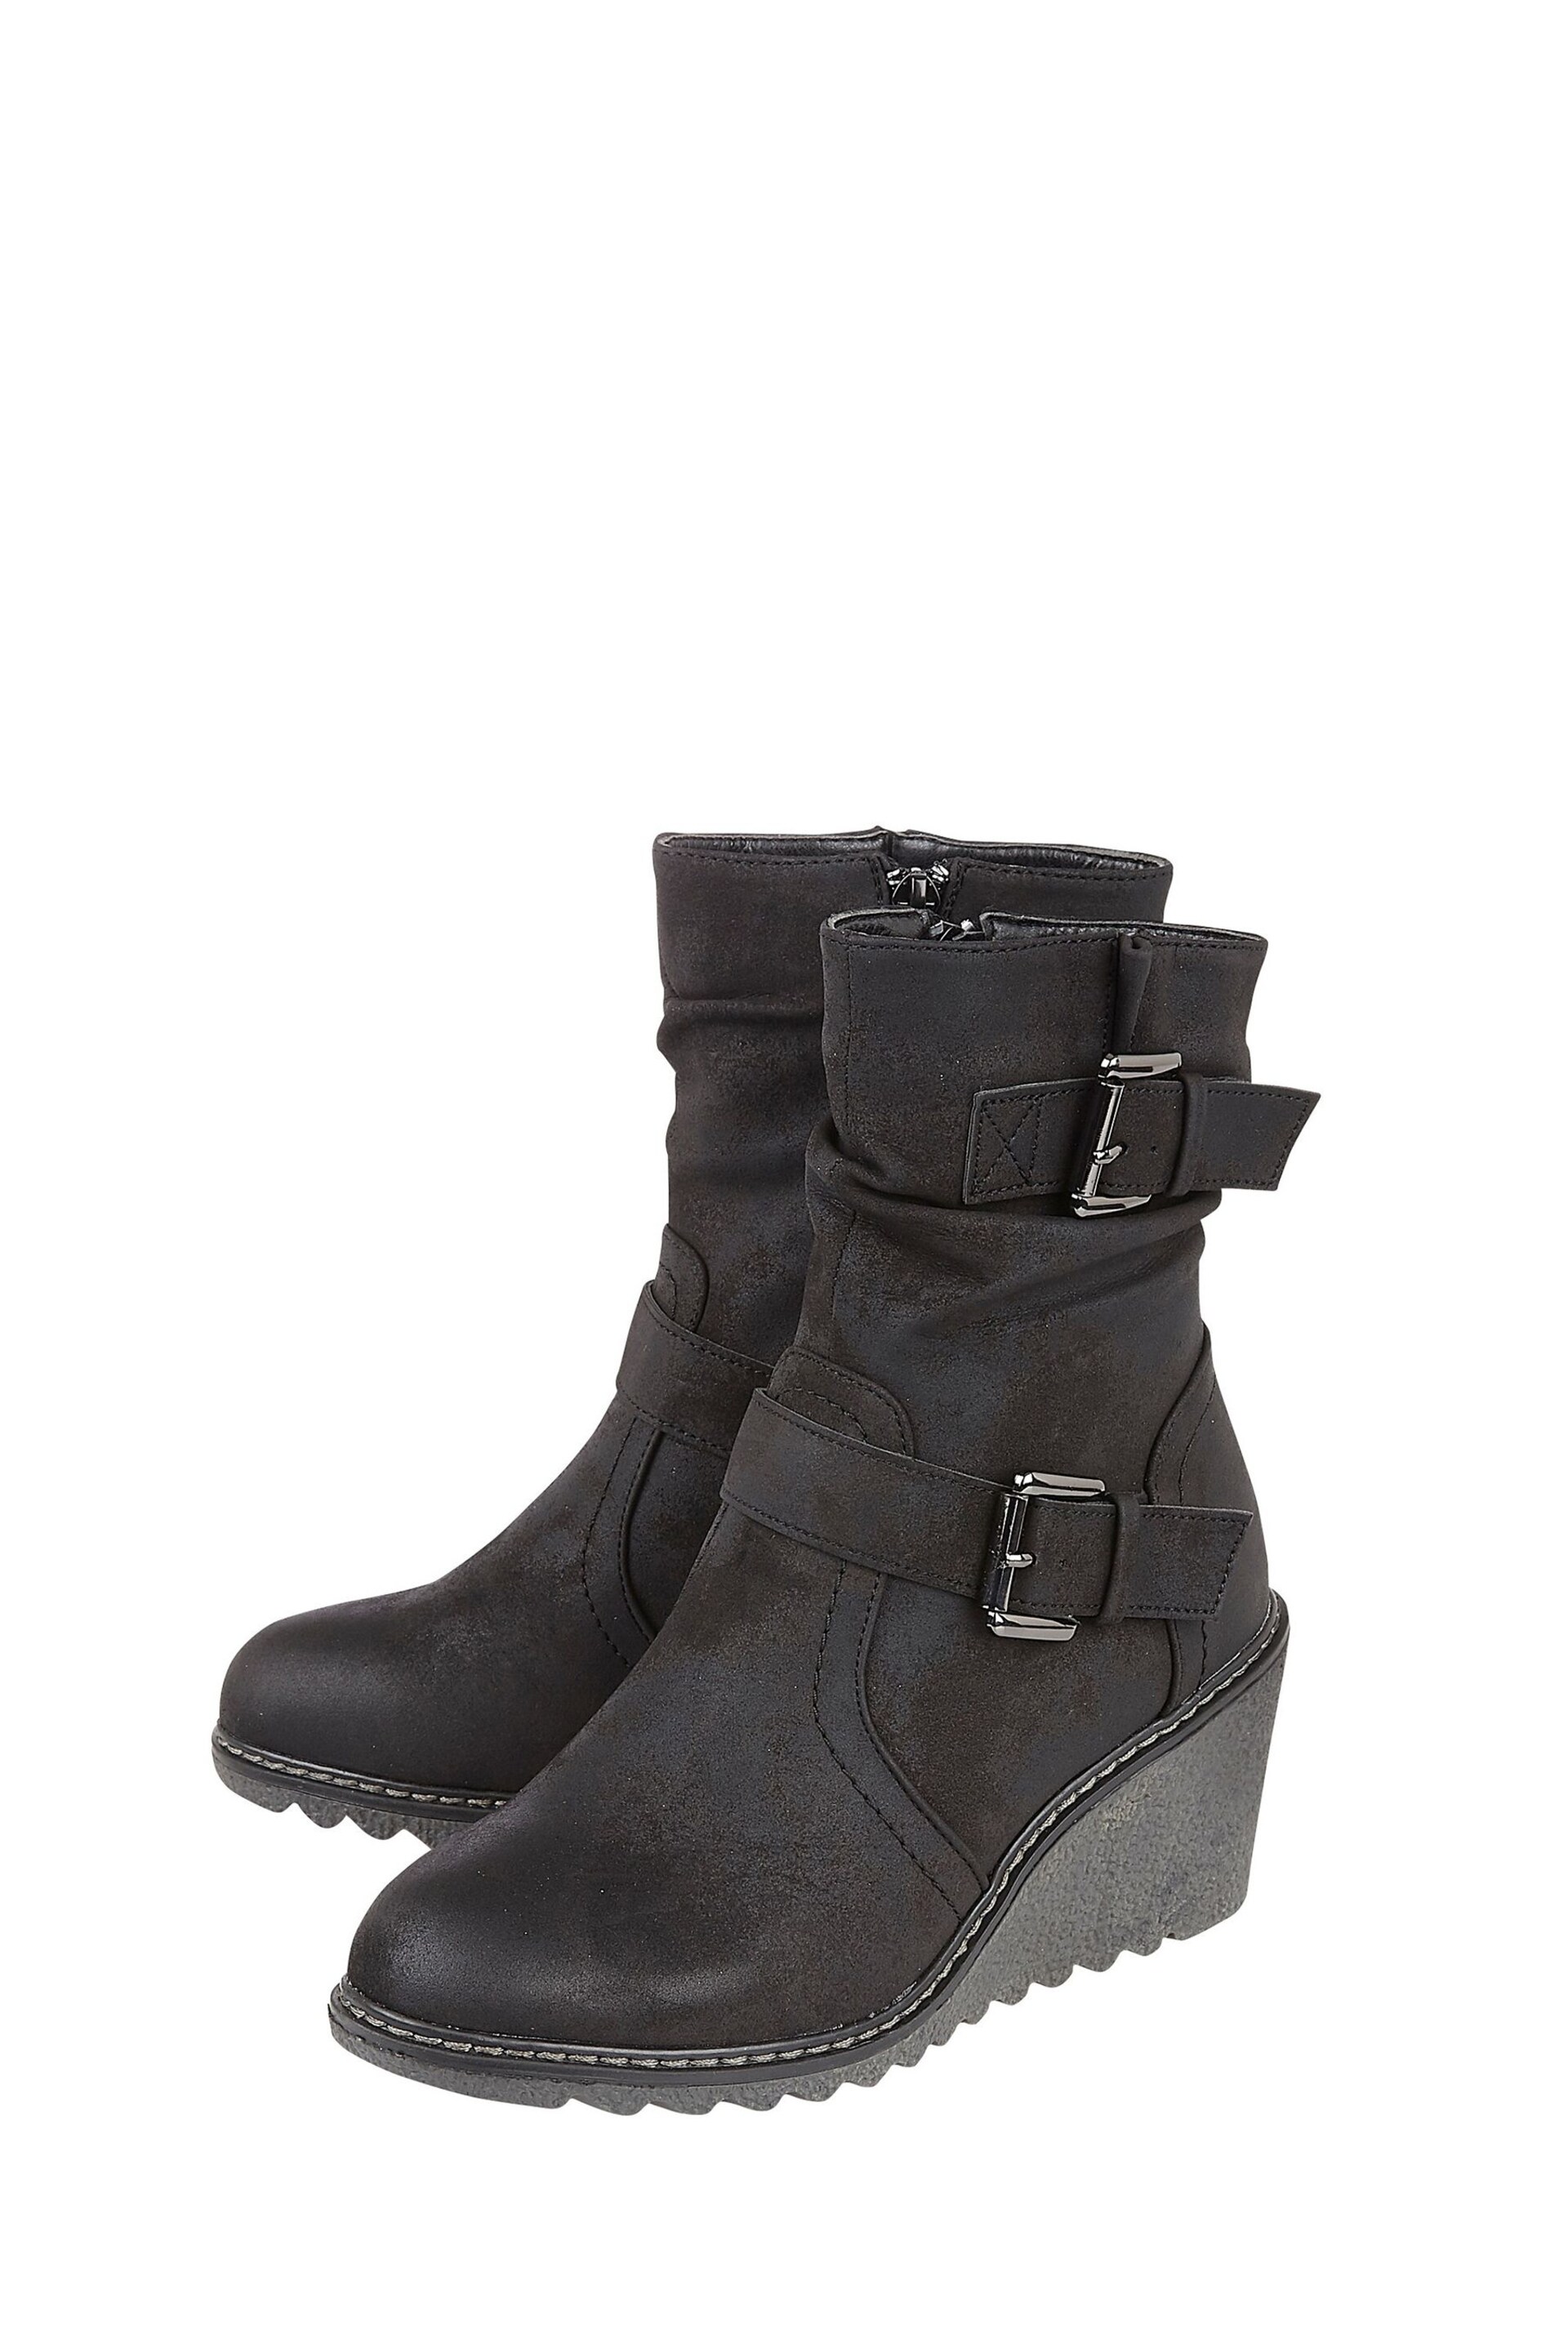 Lotus Black Wedge Ankle Boots - Image 2 of 3